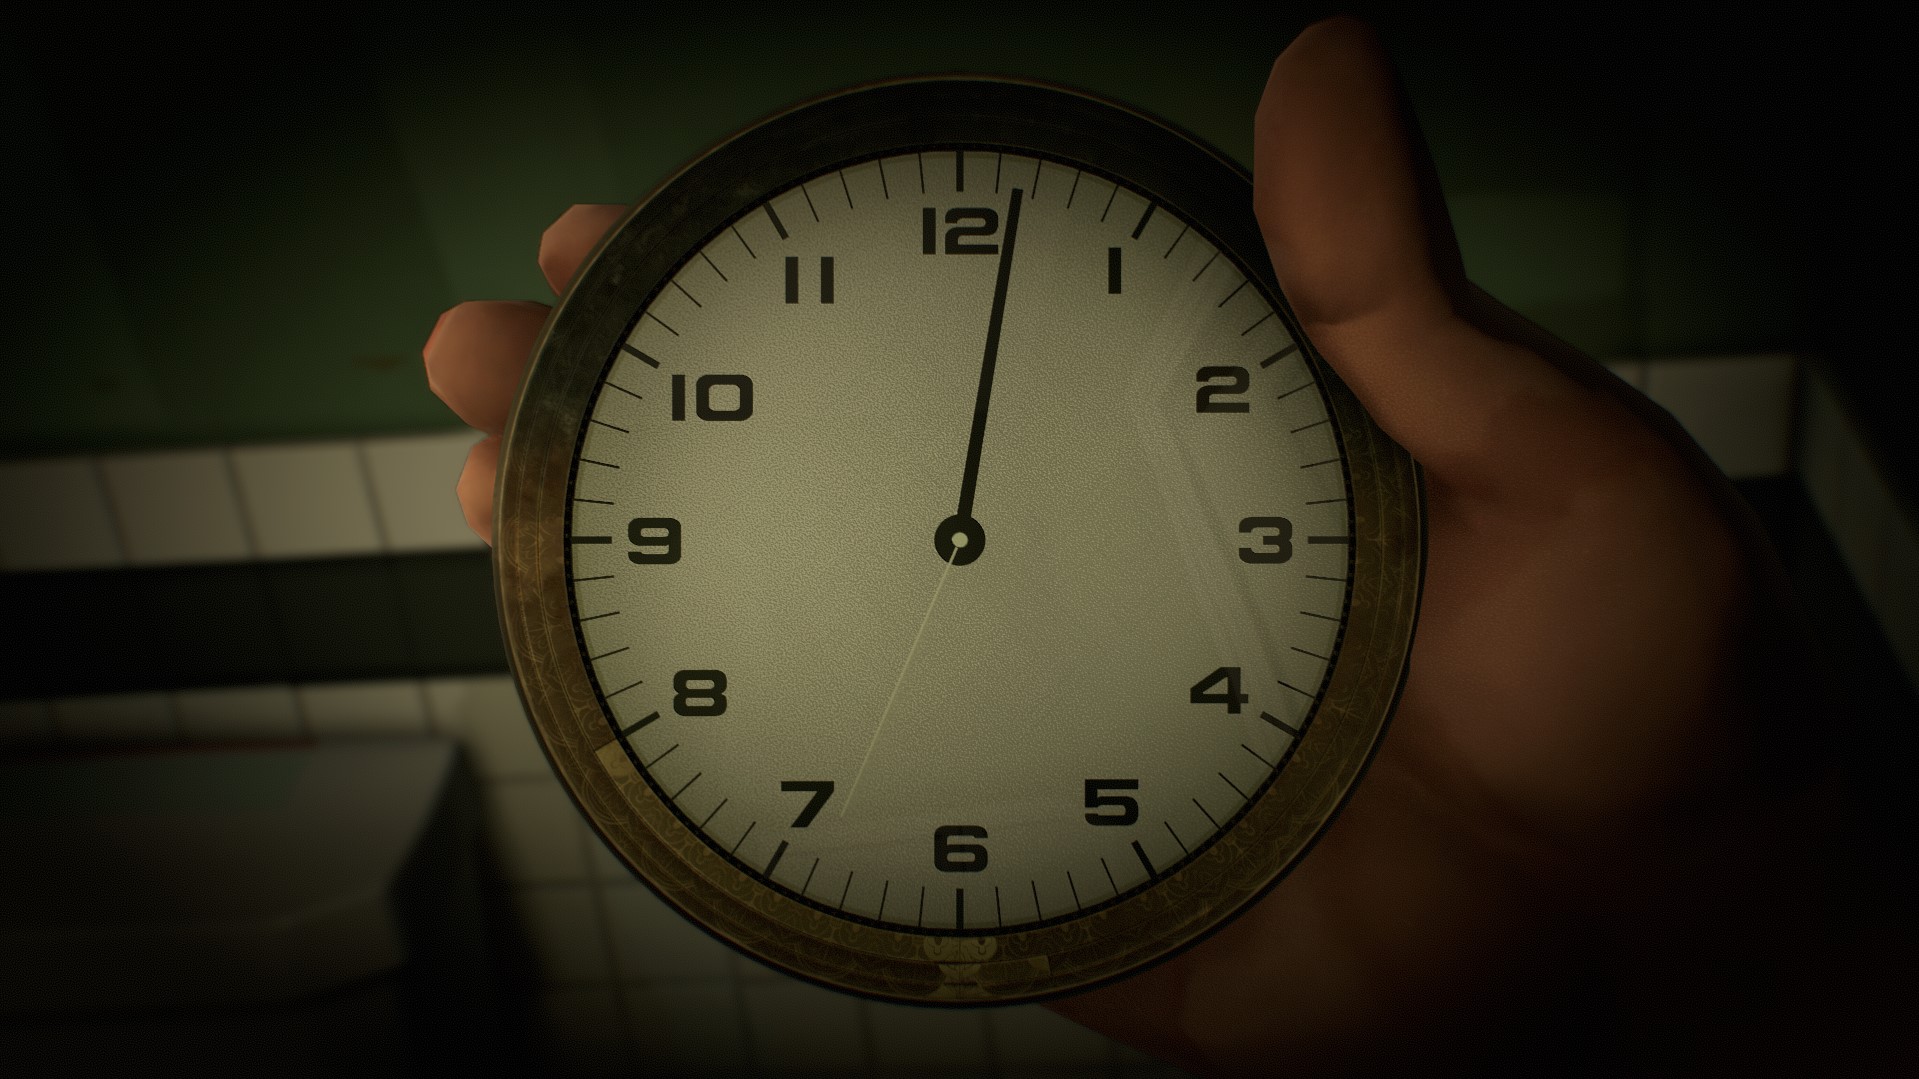 12_minutes_splash 12 Minutes - Amazing Cast, Flawed Story, Tedious Gameplay